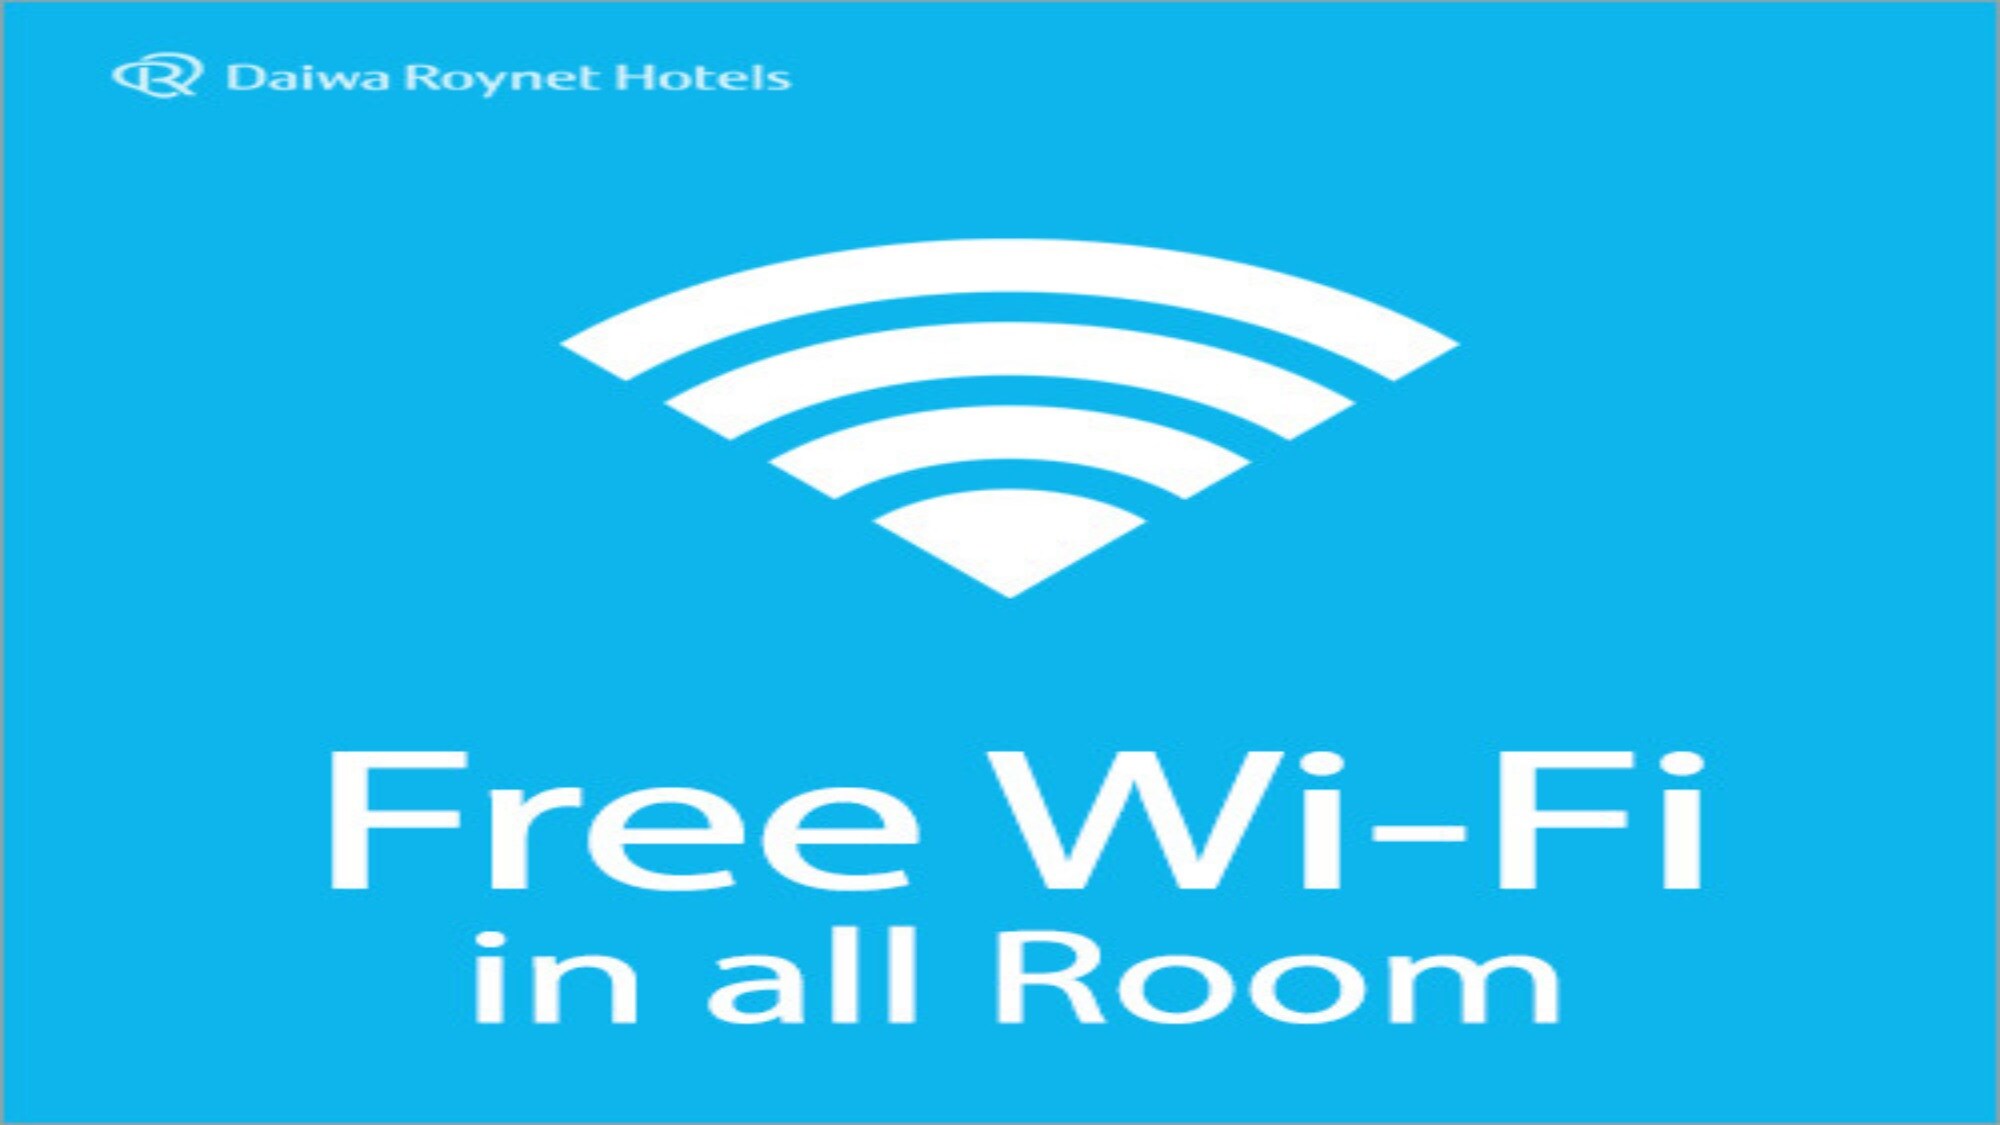 Wi-Fi compatible throughout the building